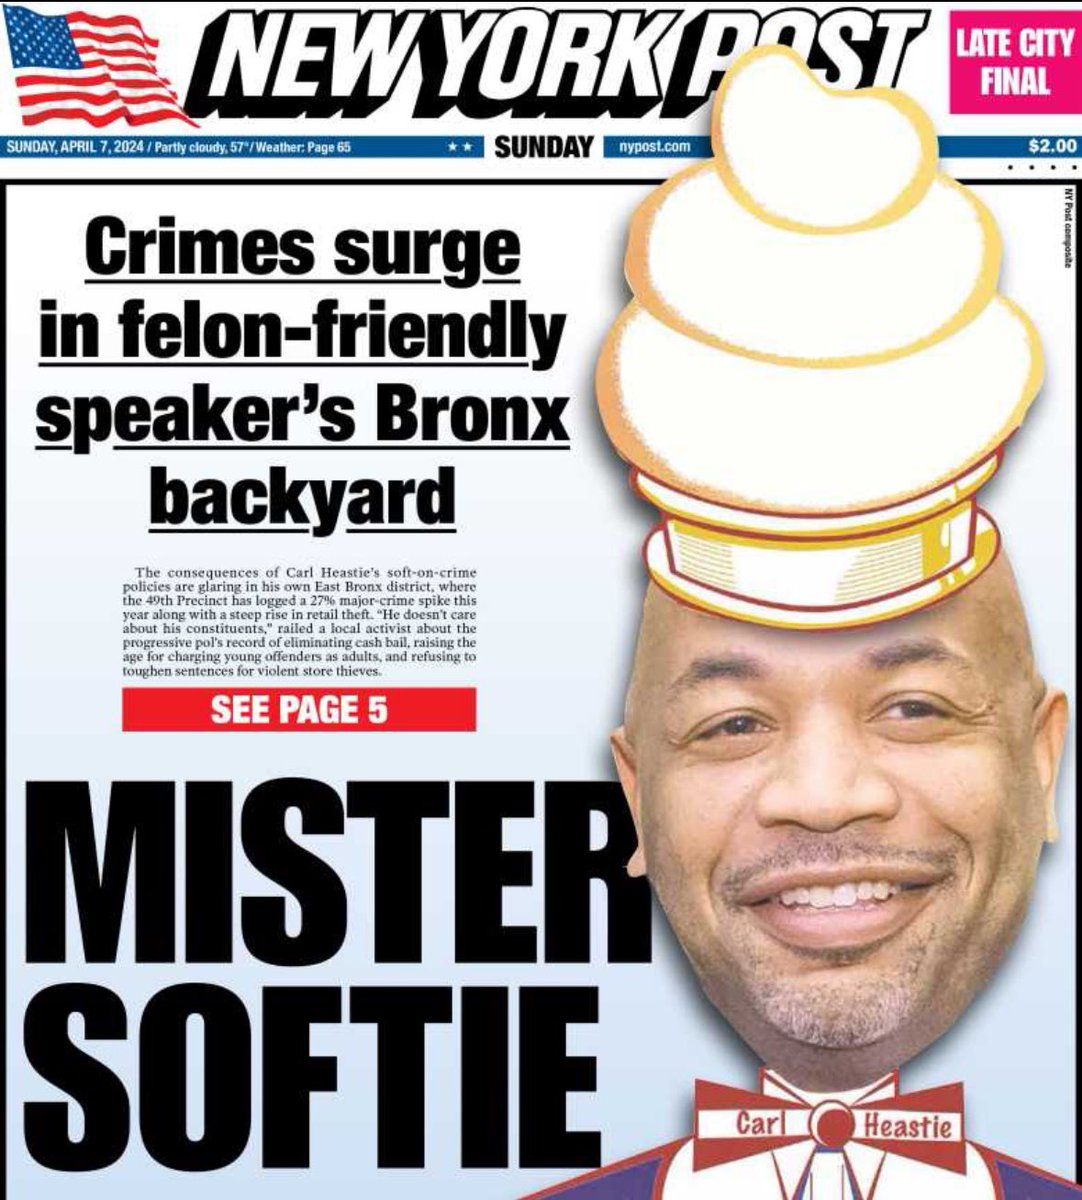 Heastie and his criminal-loving cabal have said NO TO PUBLIC SAFETY for New Yorkers Still missing is the voice of Senator Gillibrand. Her silence is deafening as New Yorkers are victimized twice — once by criminals and again by those representing them who created this crisis!